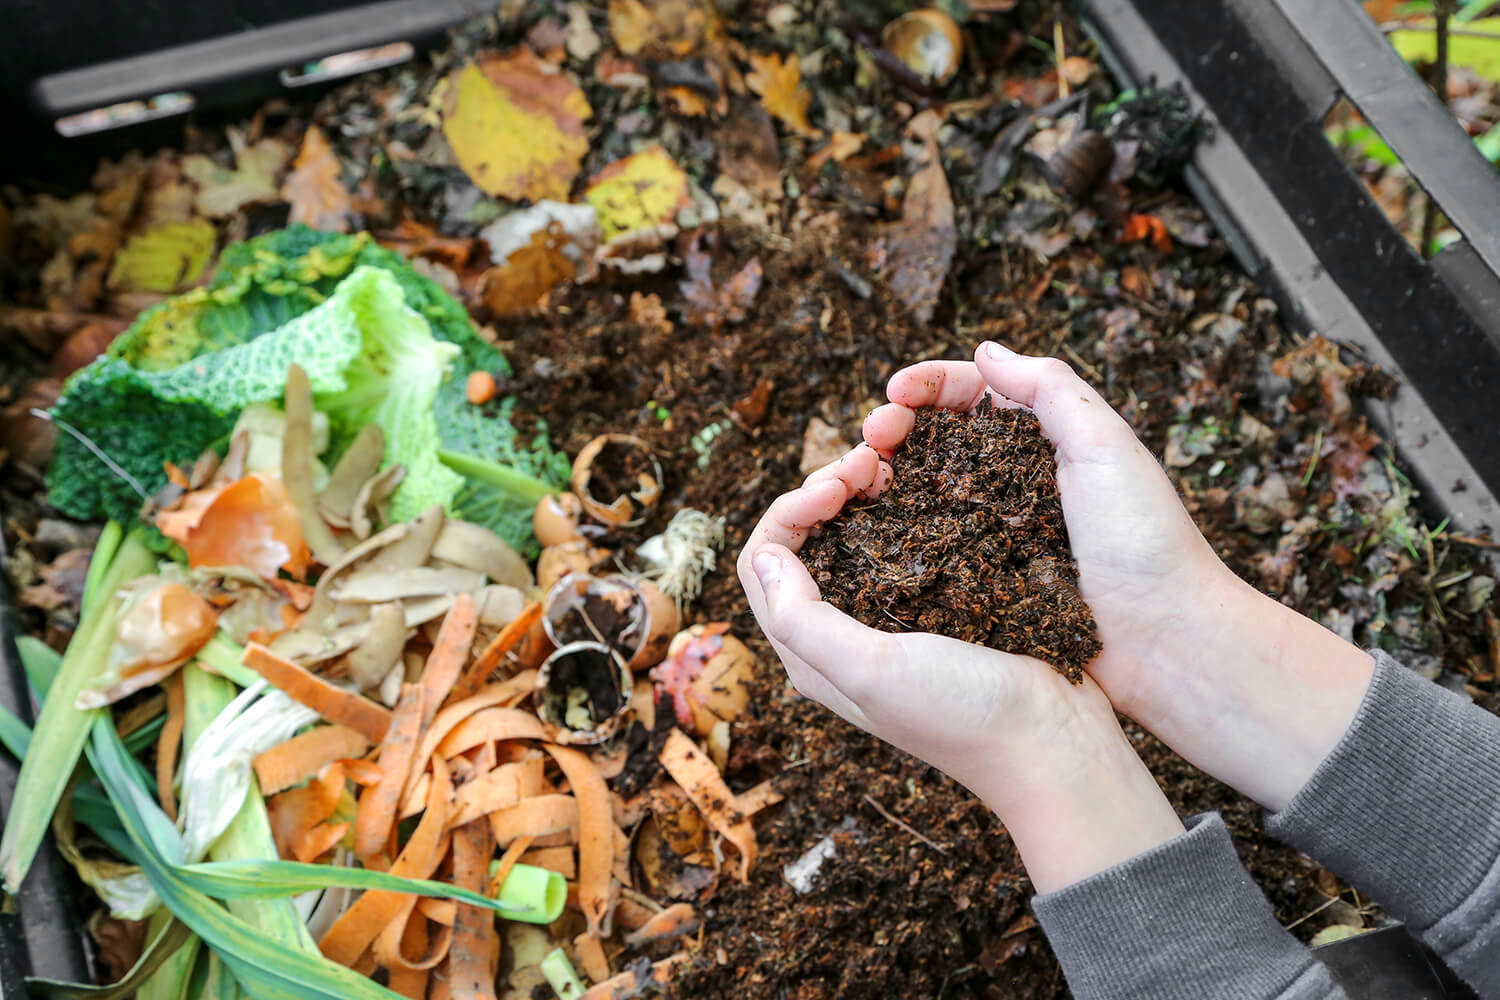 person holding composted dirt over composter full of dirt and food scraps